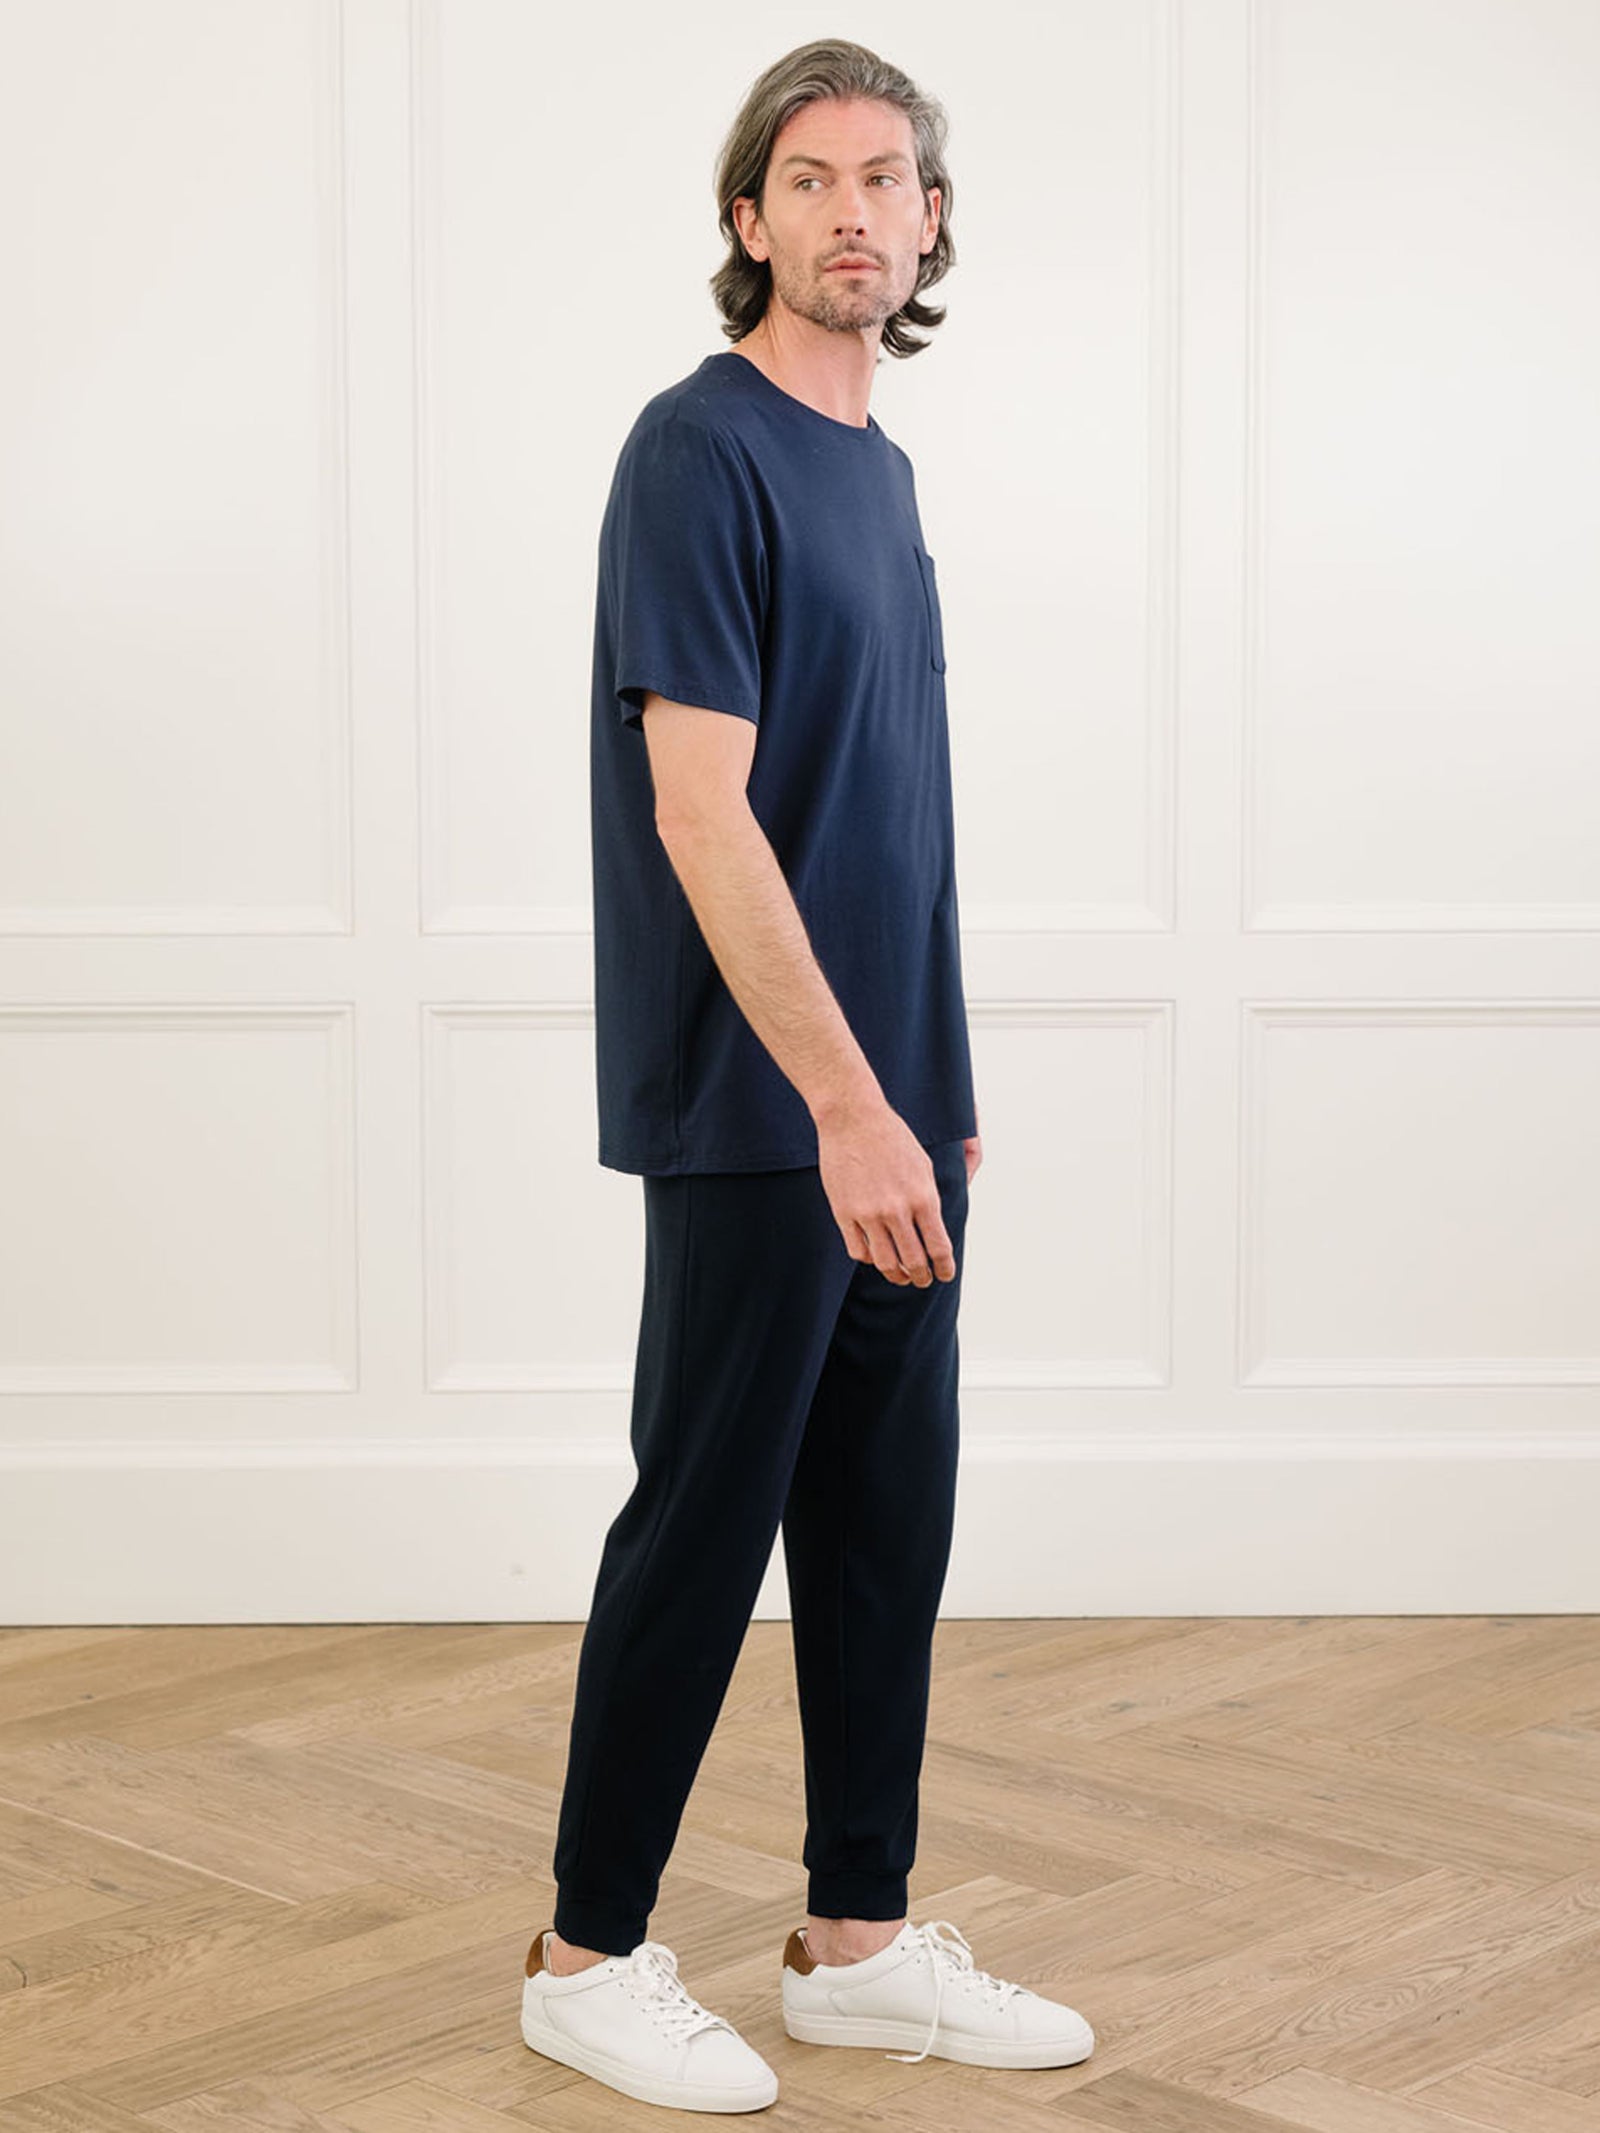 Navy Men's Stretch-Knit Bamboo Lounge Tee. A man is wearing the lounge tee in a well lit home.